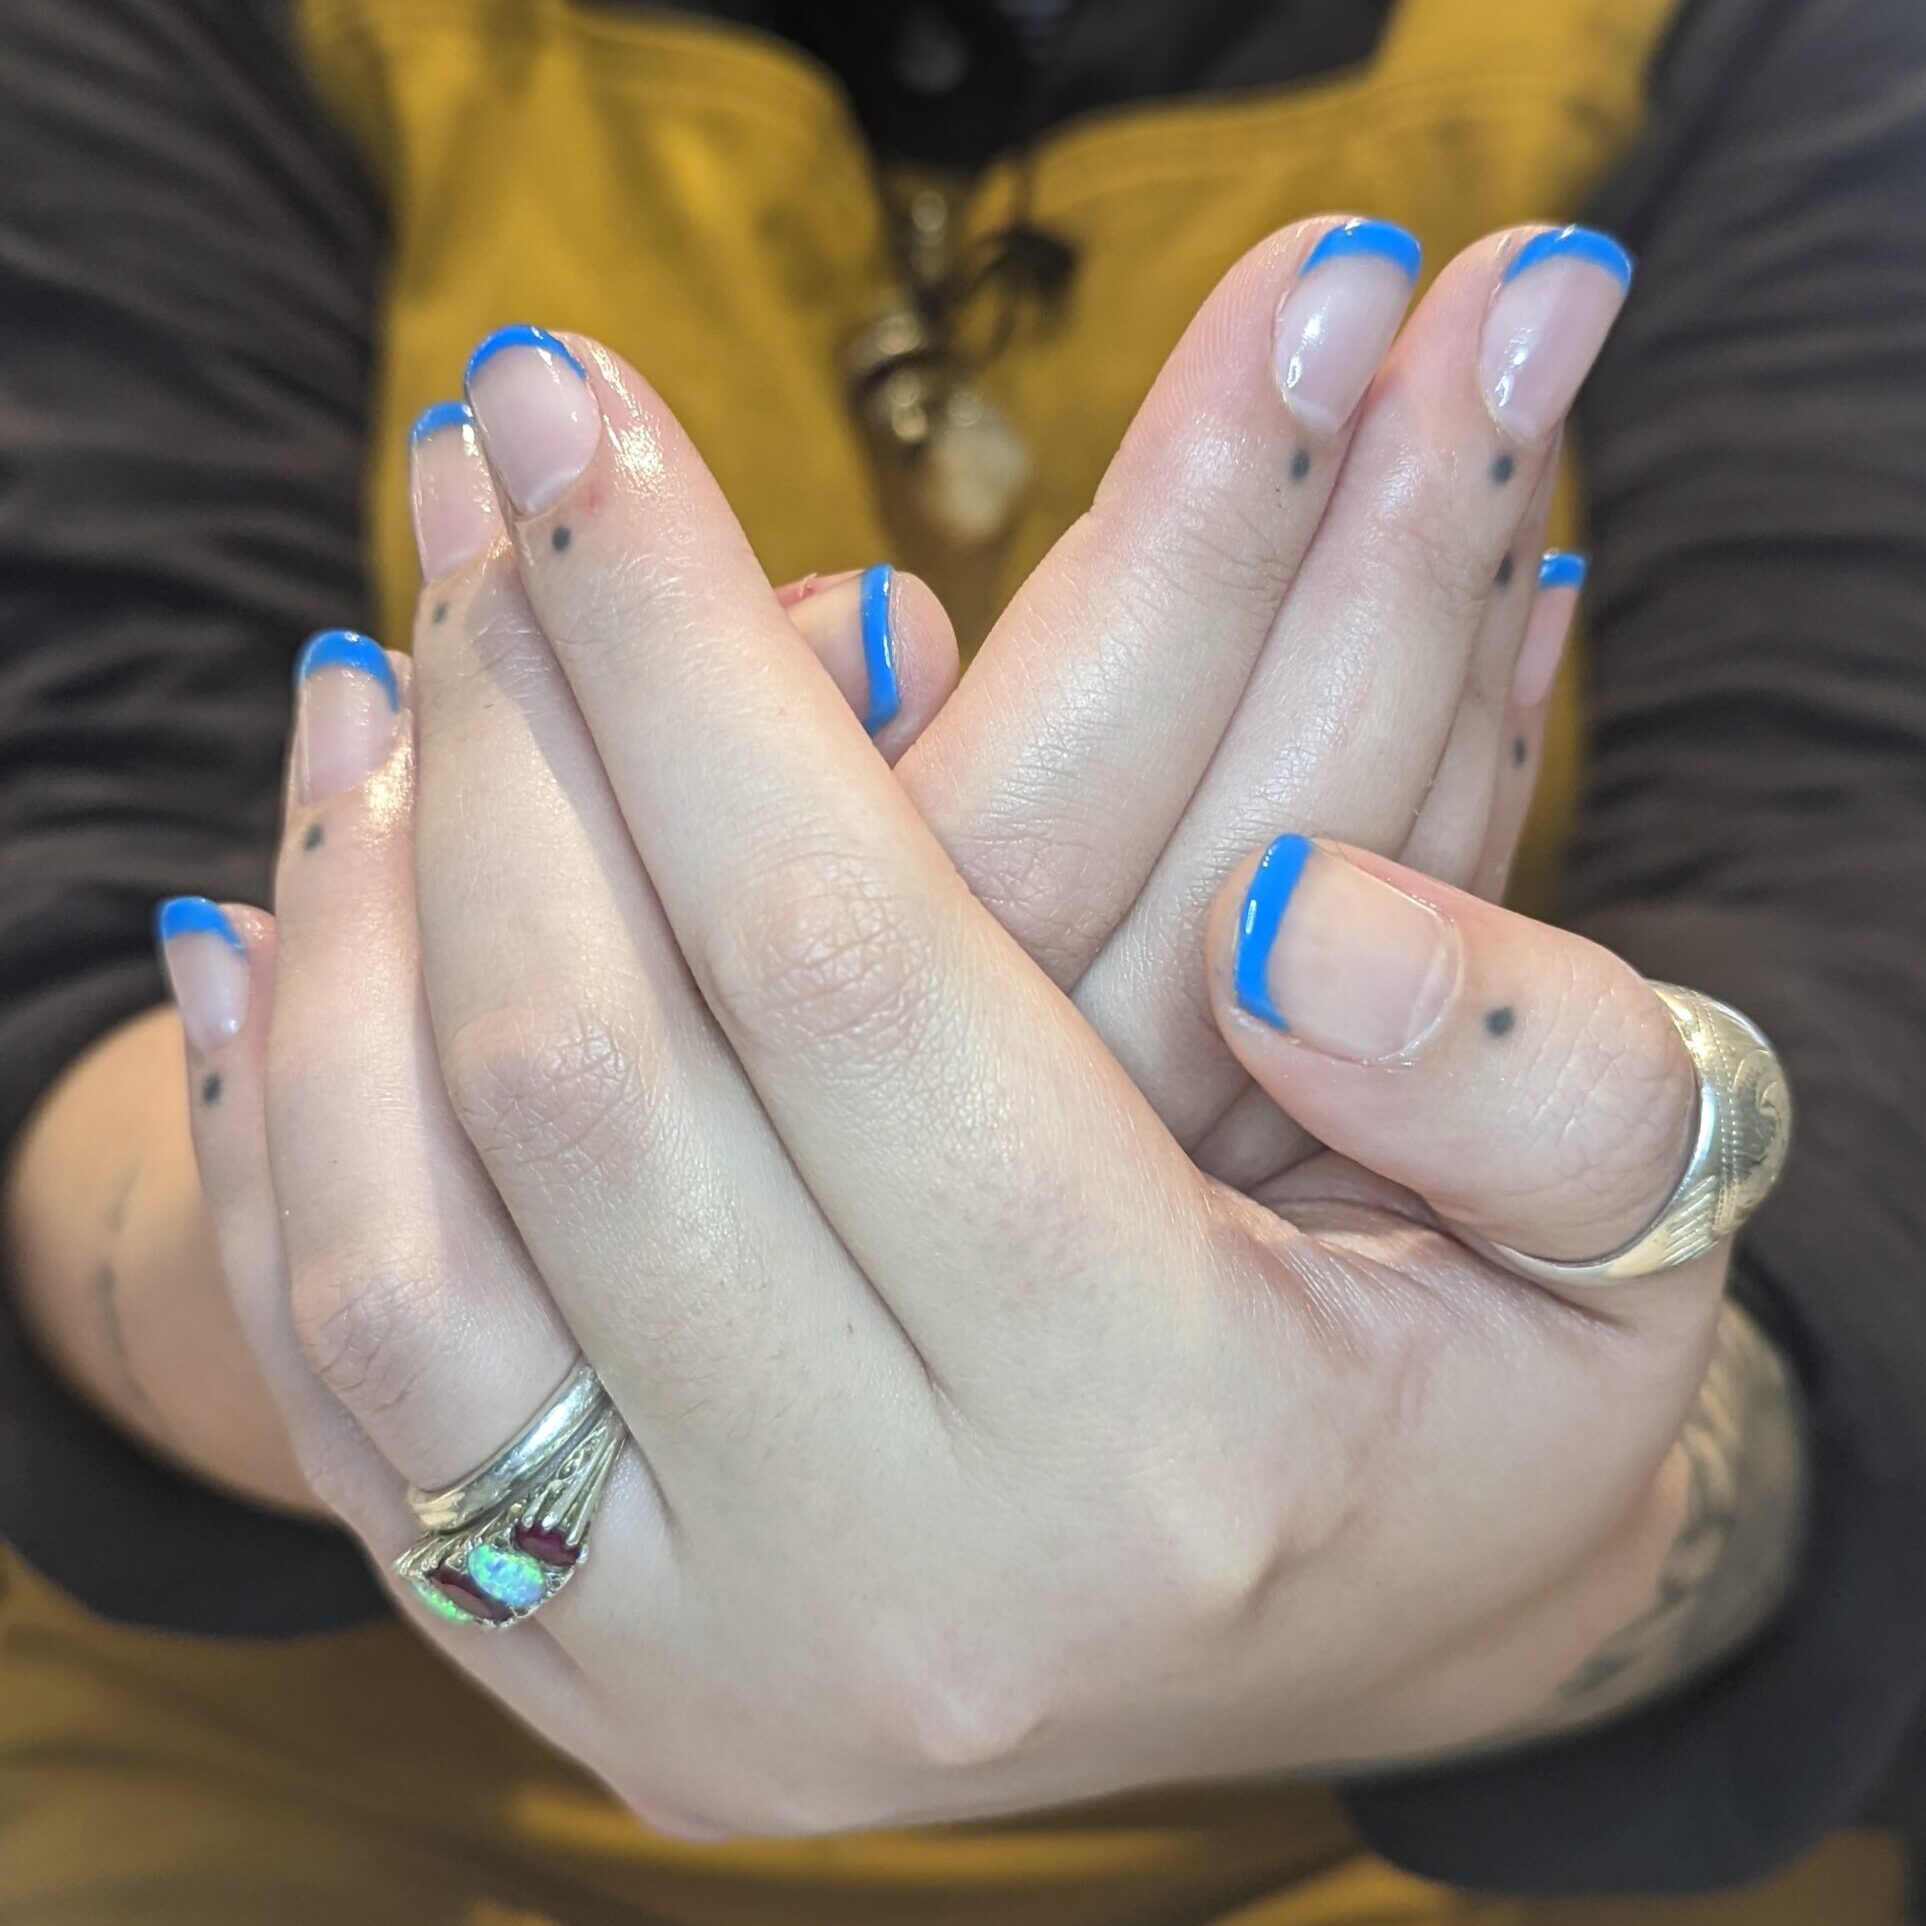 Nude nails with bright blue painted tips. Ginger Harmony - Nourishing vegan beauty in the heart of Oakham